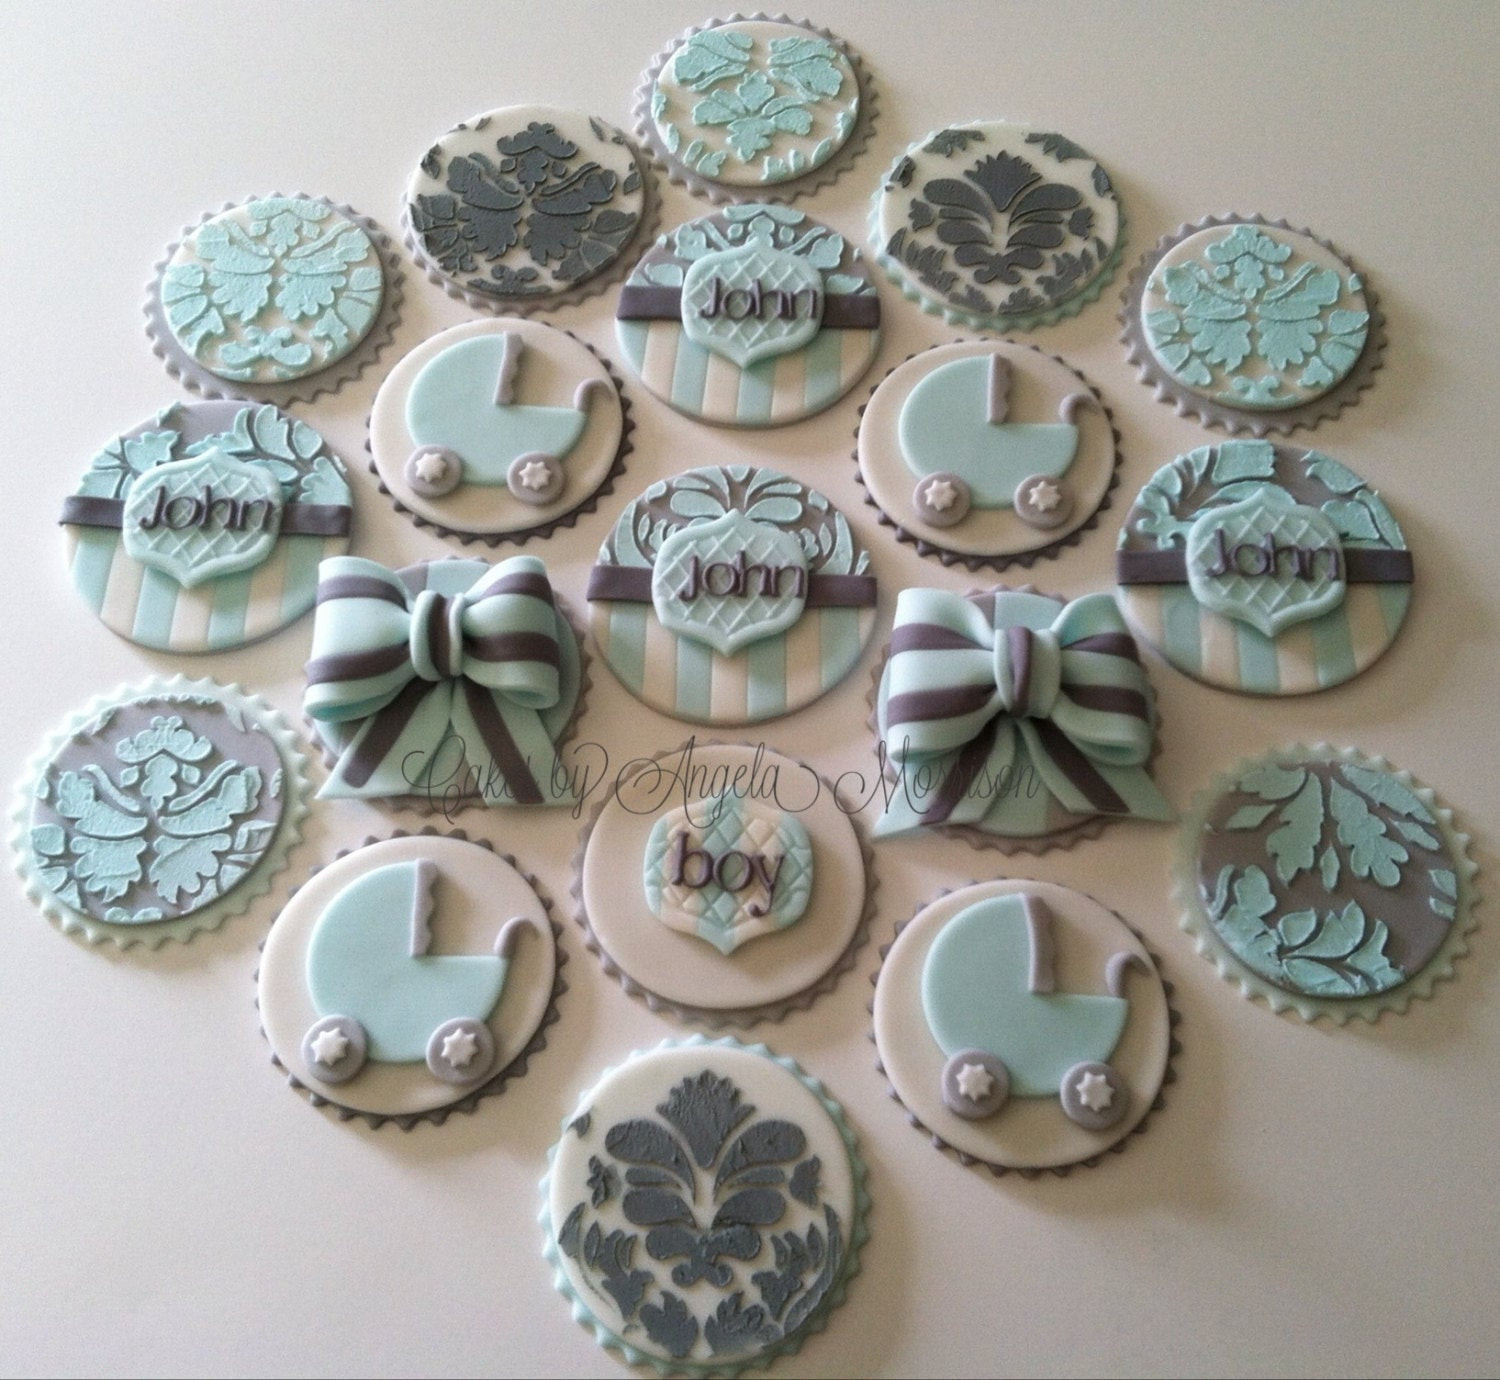 Baby Boy Cupcakes Toppers
 Baby shower cupcake toppers